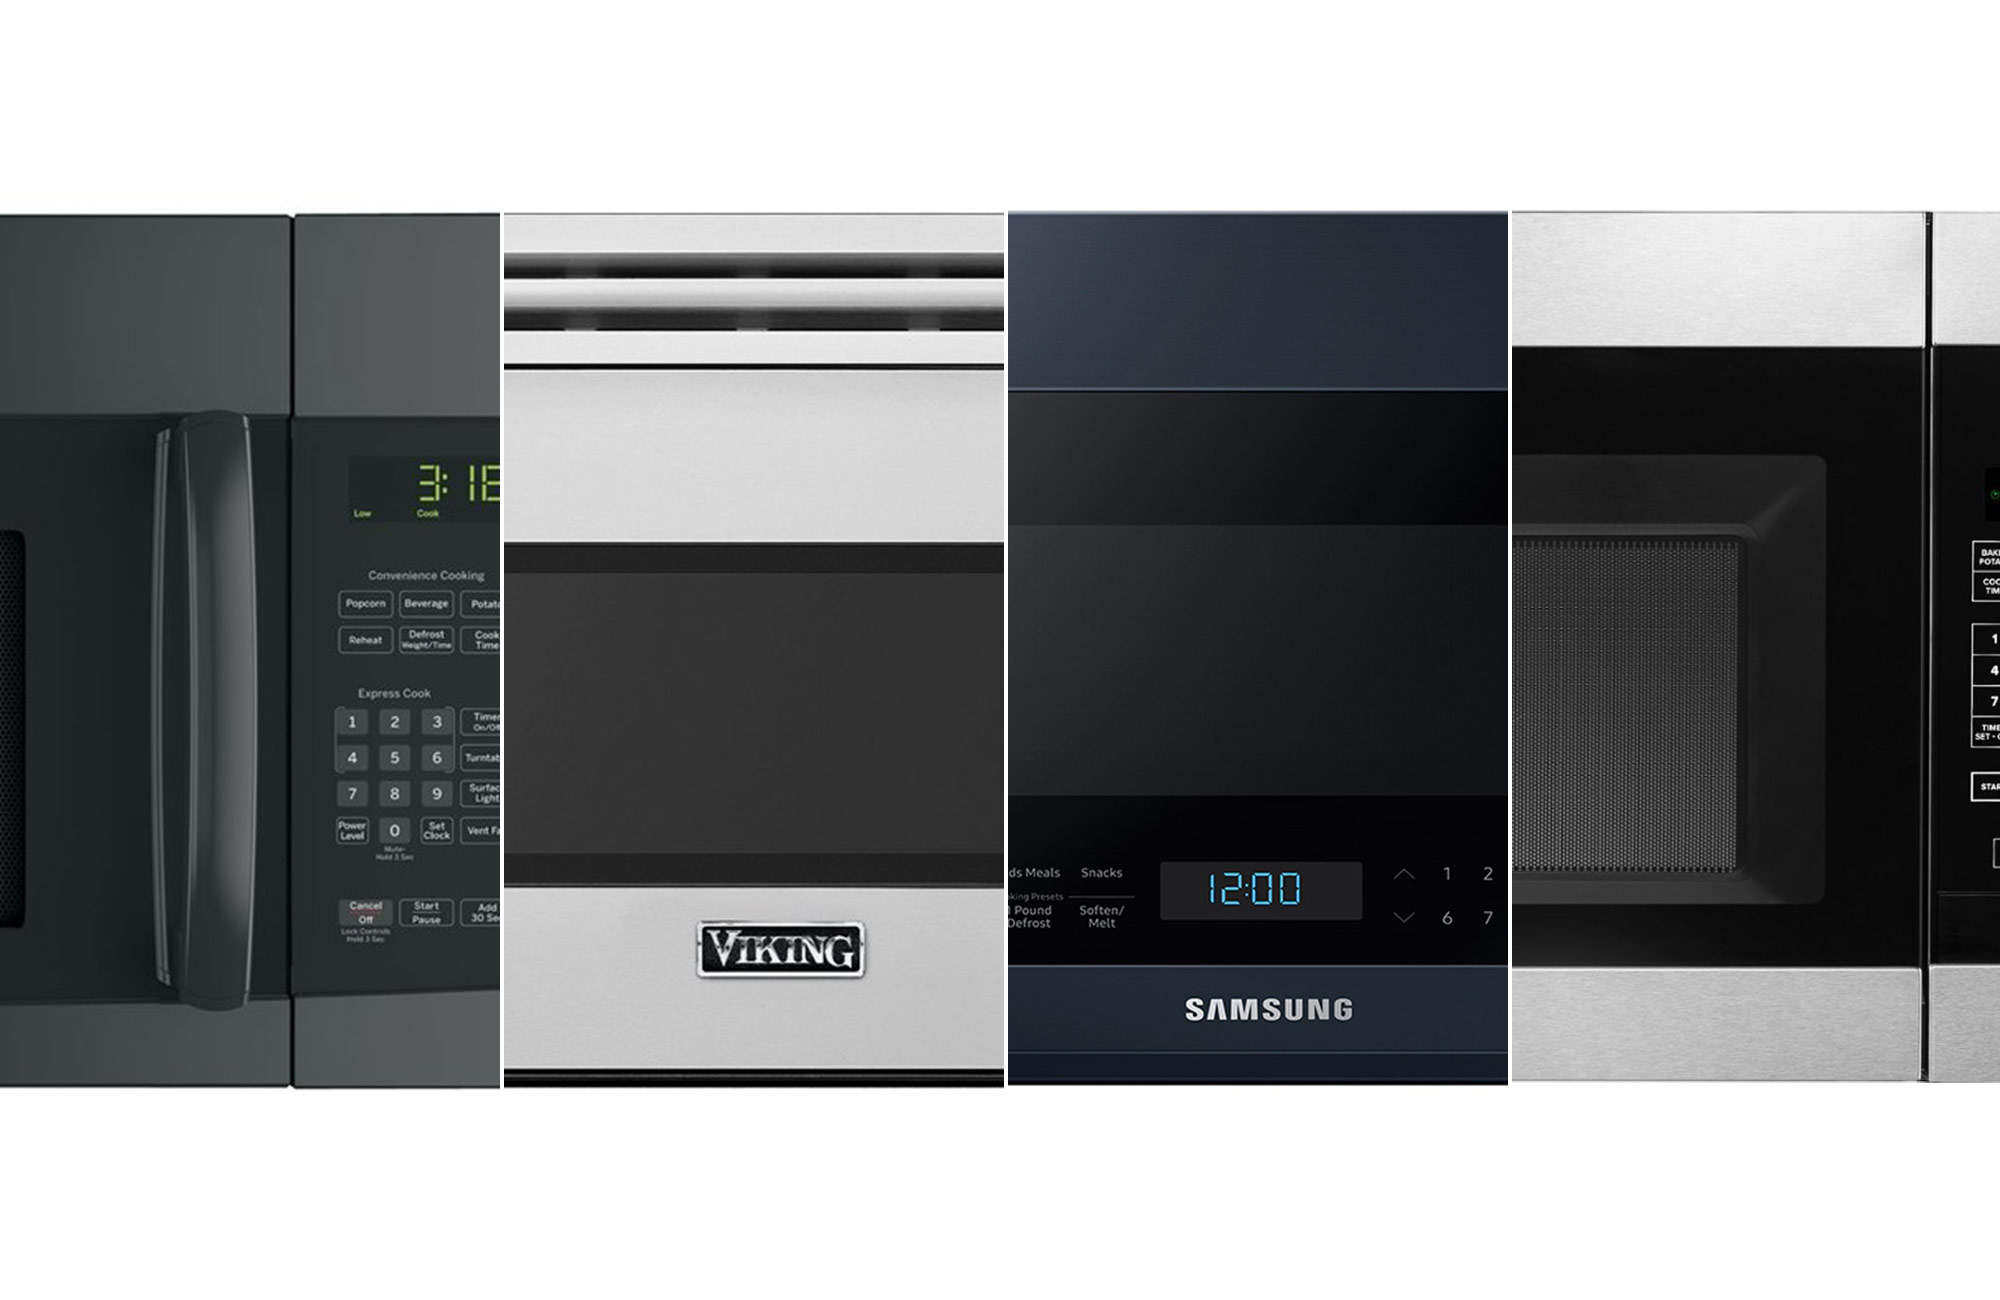 Samsung 1000W Built-In Microwave Hood Combo - 1.9 cu ft - Stainless Steel